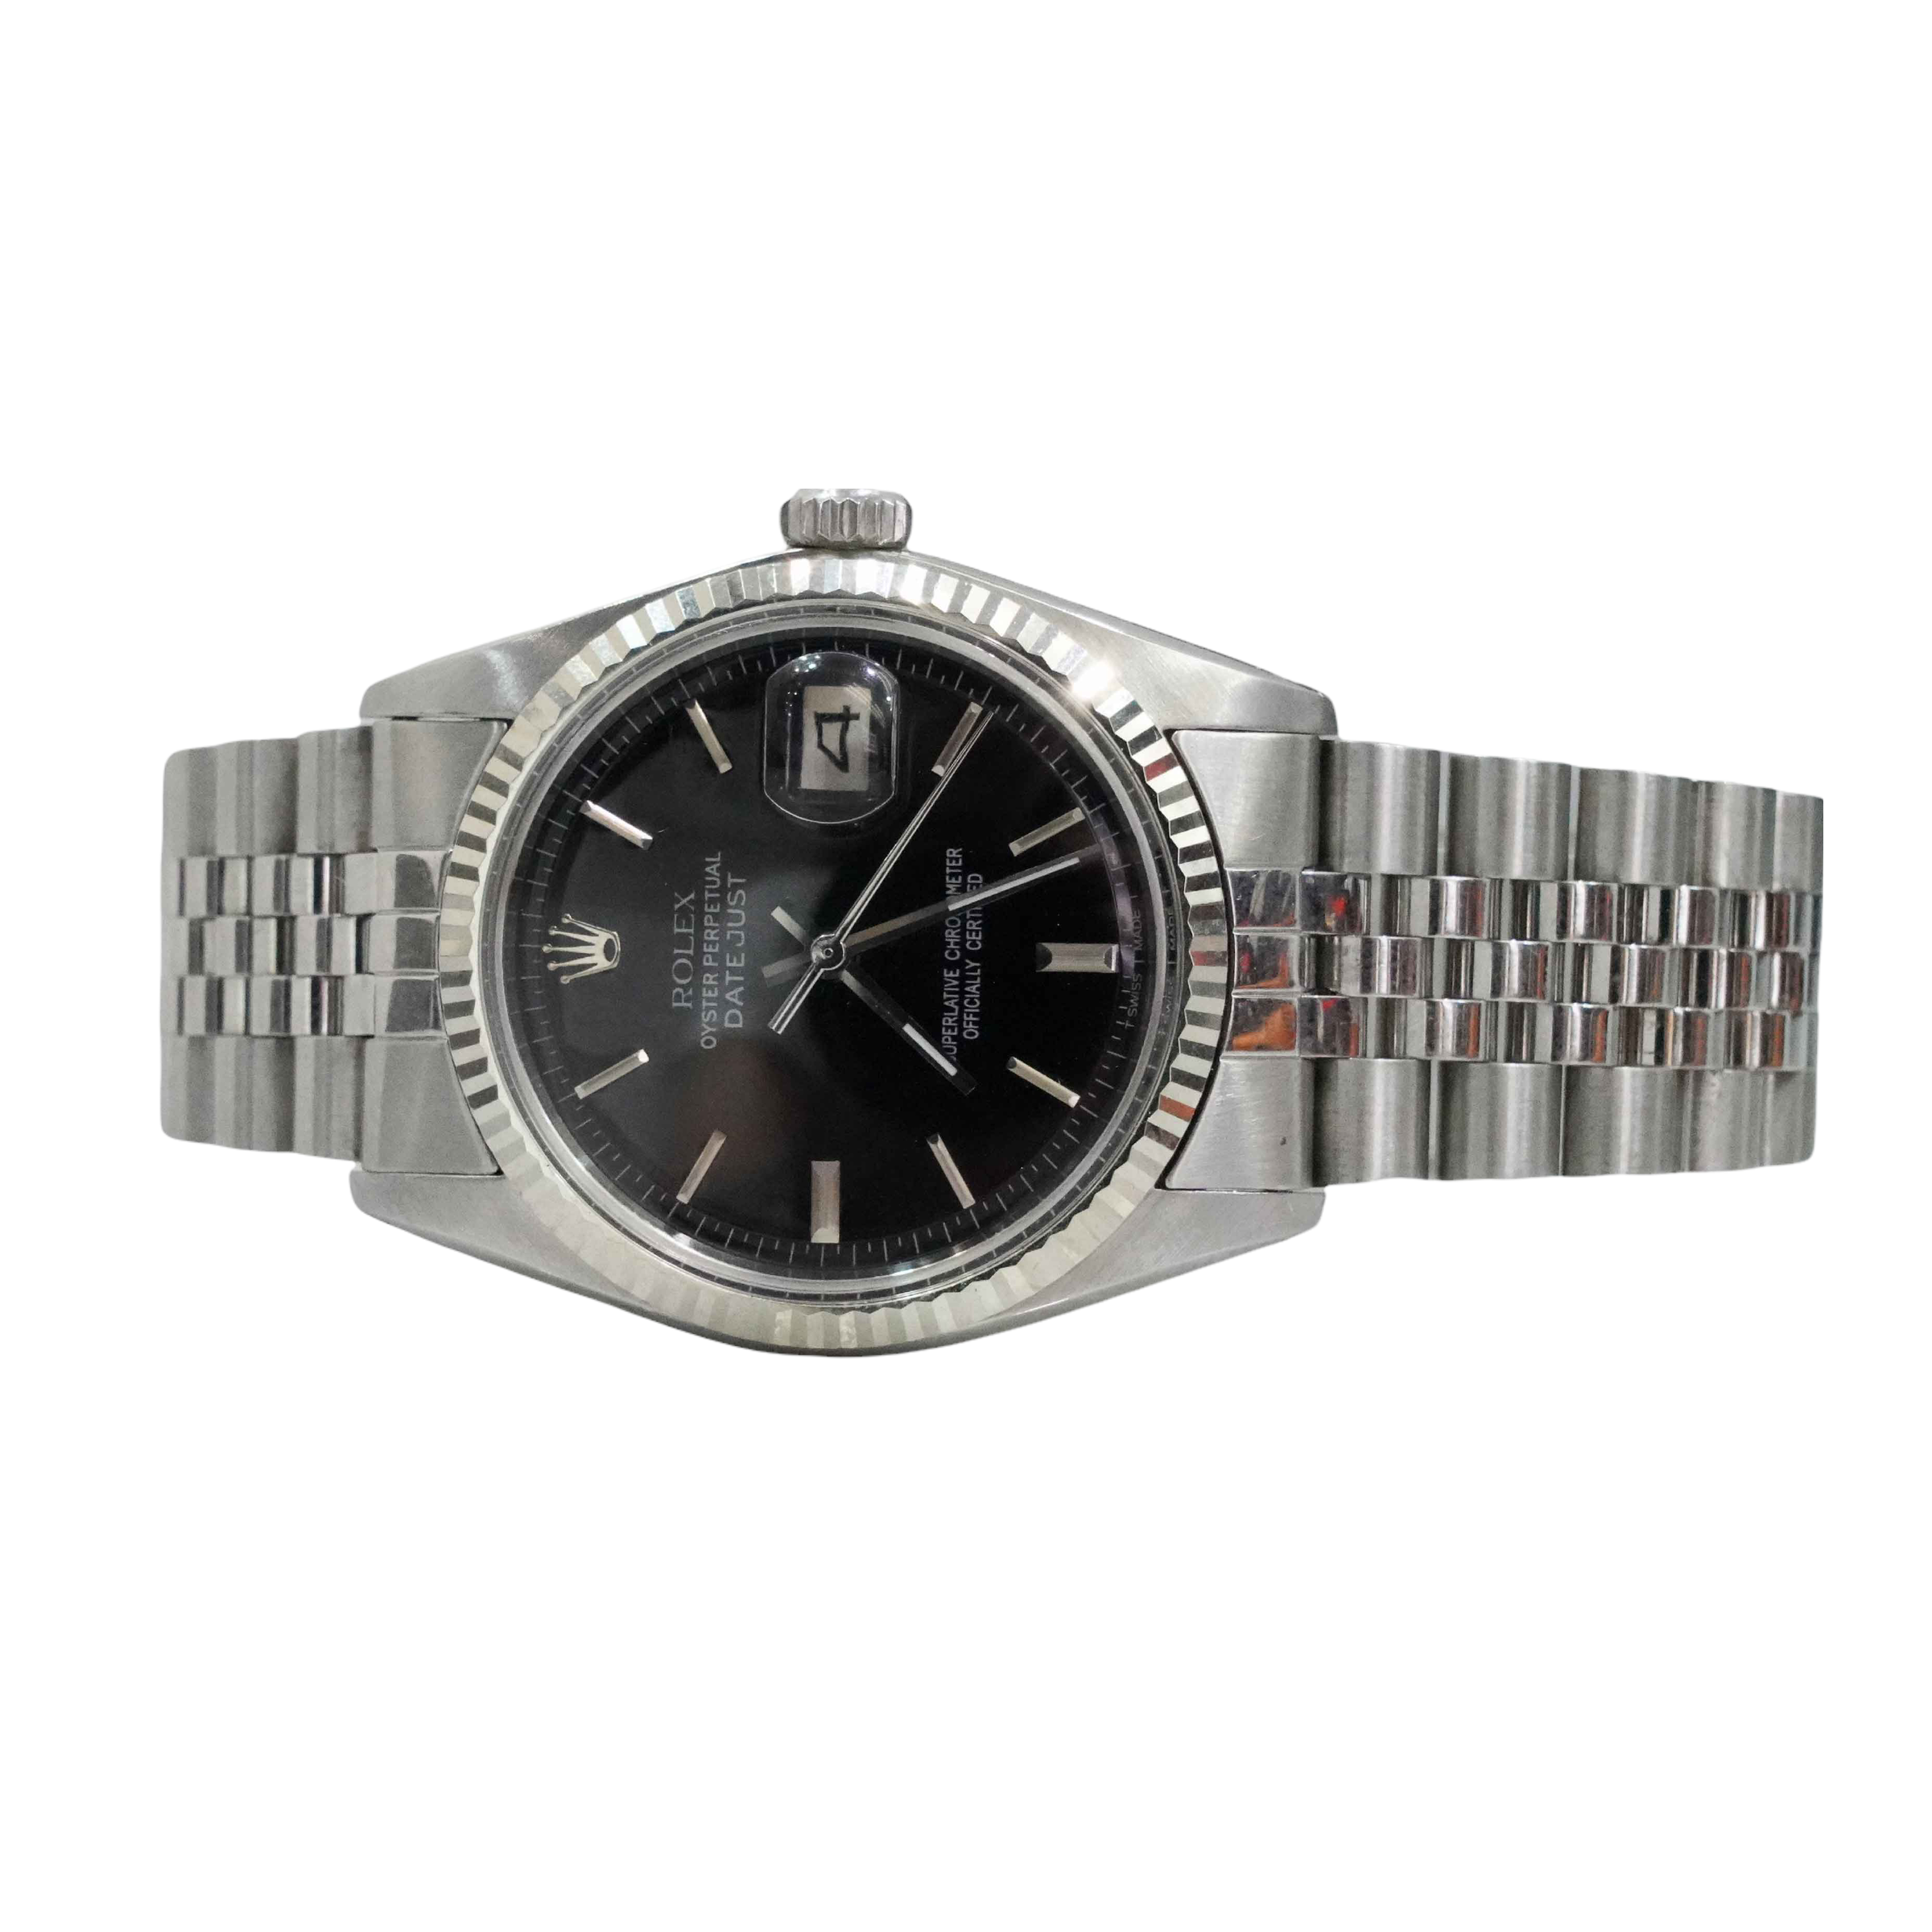 Rolex Date Just 36mm Stainless Steel Ref: 1601